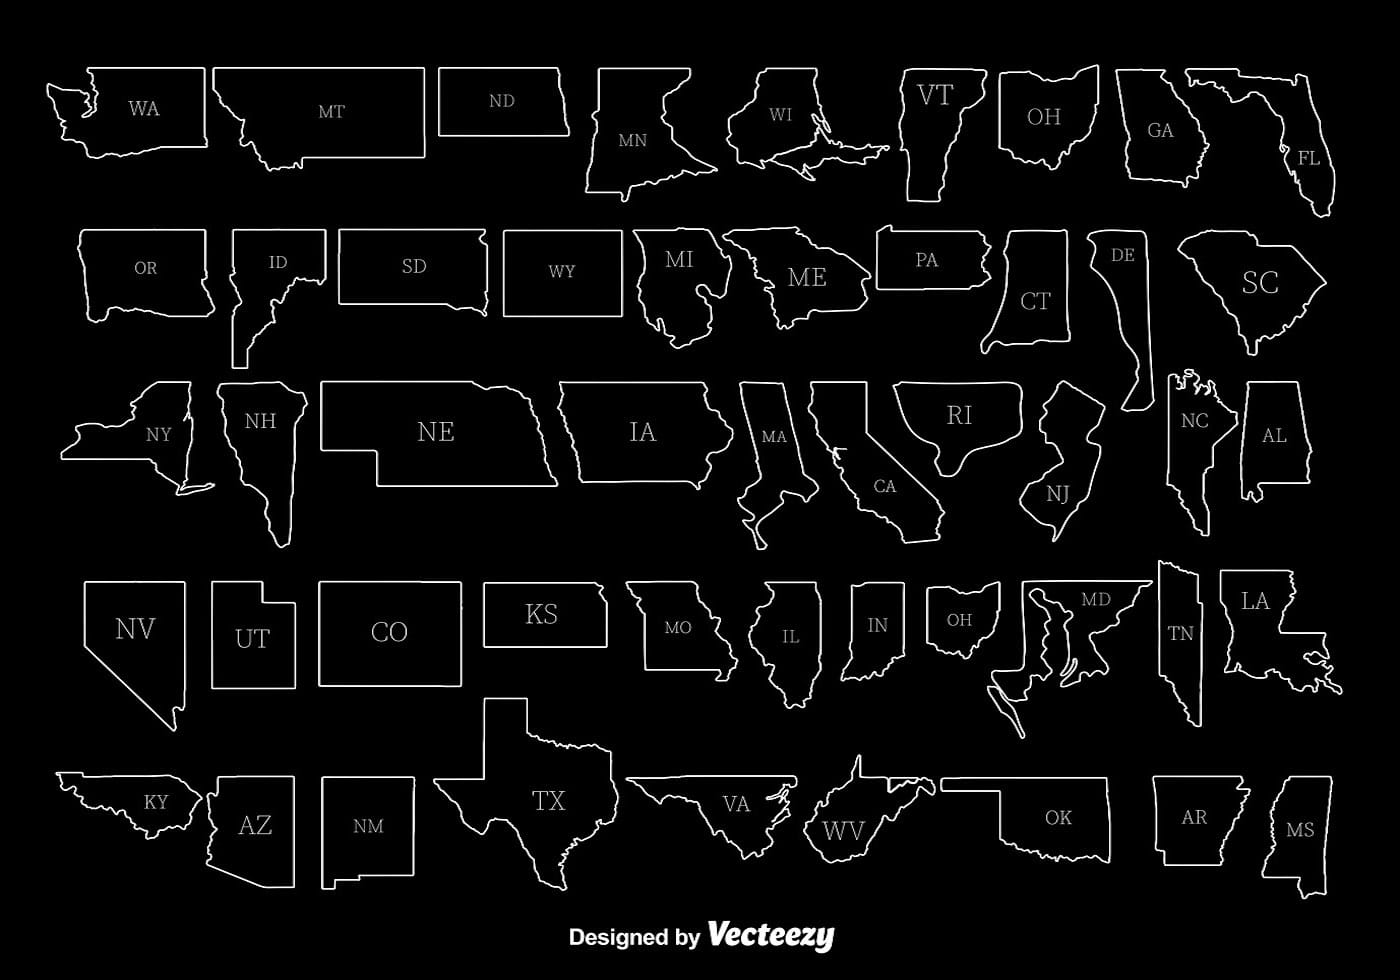 Download Washington State Outline Vector at GetDrawings.com | Free ...